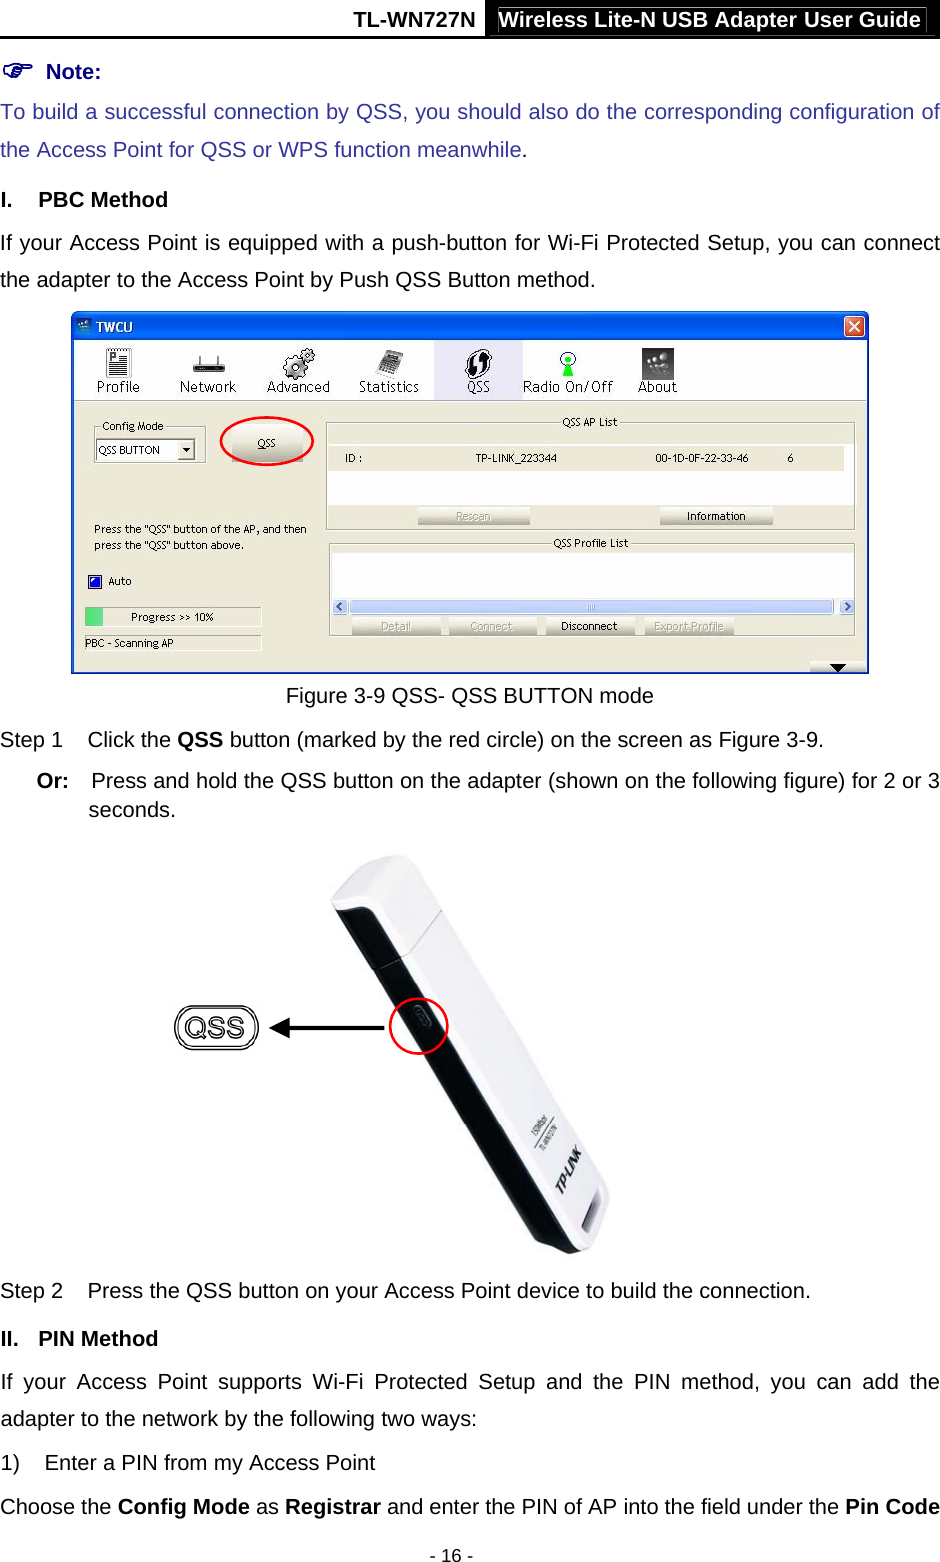 TL-WN727N Wireless Lite-N USB Adapter User Guide - 16 - ) Note:   To build a successful connection by QSS, you should also do the corresponding configuration of the Access Point for QSS or WPS function meanwhile. I. PBC Method If your Access Point is equipped with a push-button for Wi-Fi Protected Setup, you can connect the adapter to the Access Point by Push QSS Button method.  Figure 3-9 QSS- QSS BUTTON mode Step 1  Click the QSS button (marked by the red circle) on the screen as Figure 3-9. Or:  Press and hold the QSS button on the adapter (shown on the following figure) for 2 or 3 seconds.  Step 2  Press the QSS button on your Access Point device to build the connection. II. PIN Method If your Access Point supports Wi-Fi Protected Setup and the PIN method, you can add the adapter to the network by the following two ways: 1)  Enter a PIN from my Access Point   Choose the Config Mode as Registrar and enter the PIN of AP into the field under the Pin Code 